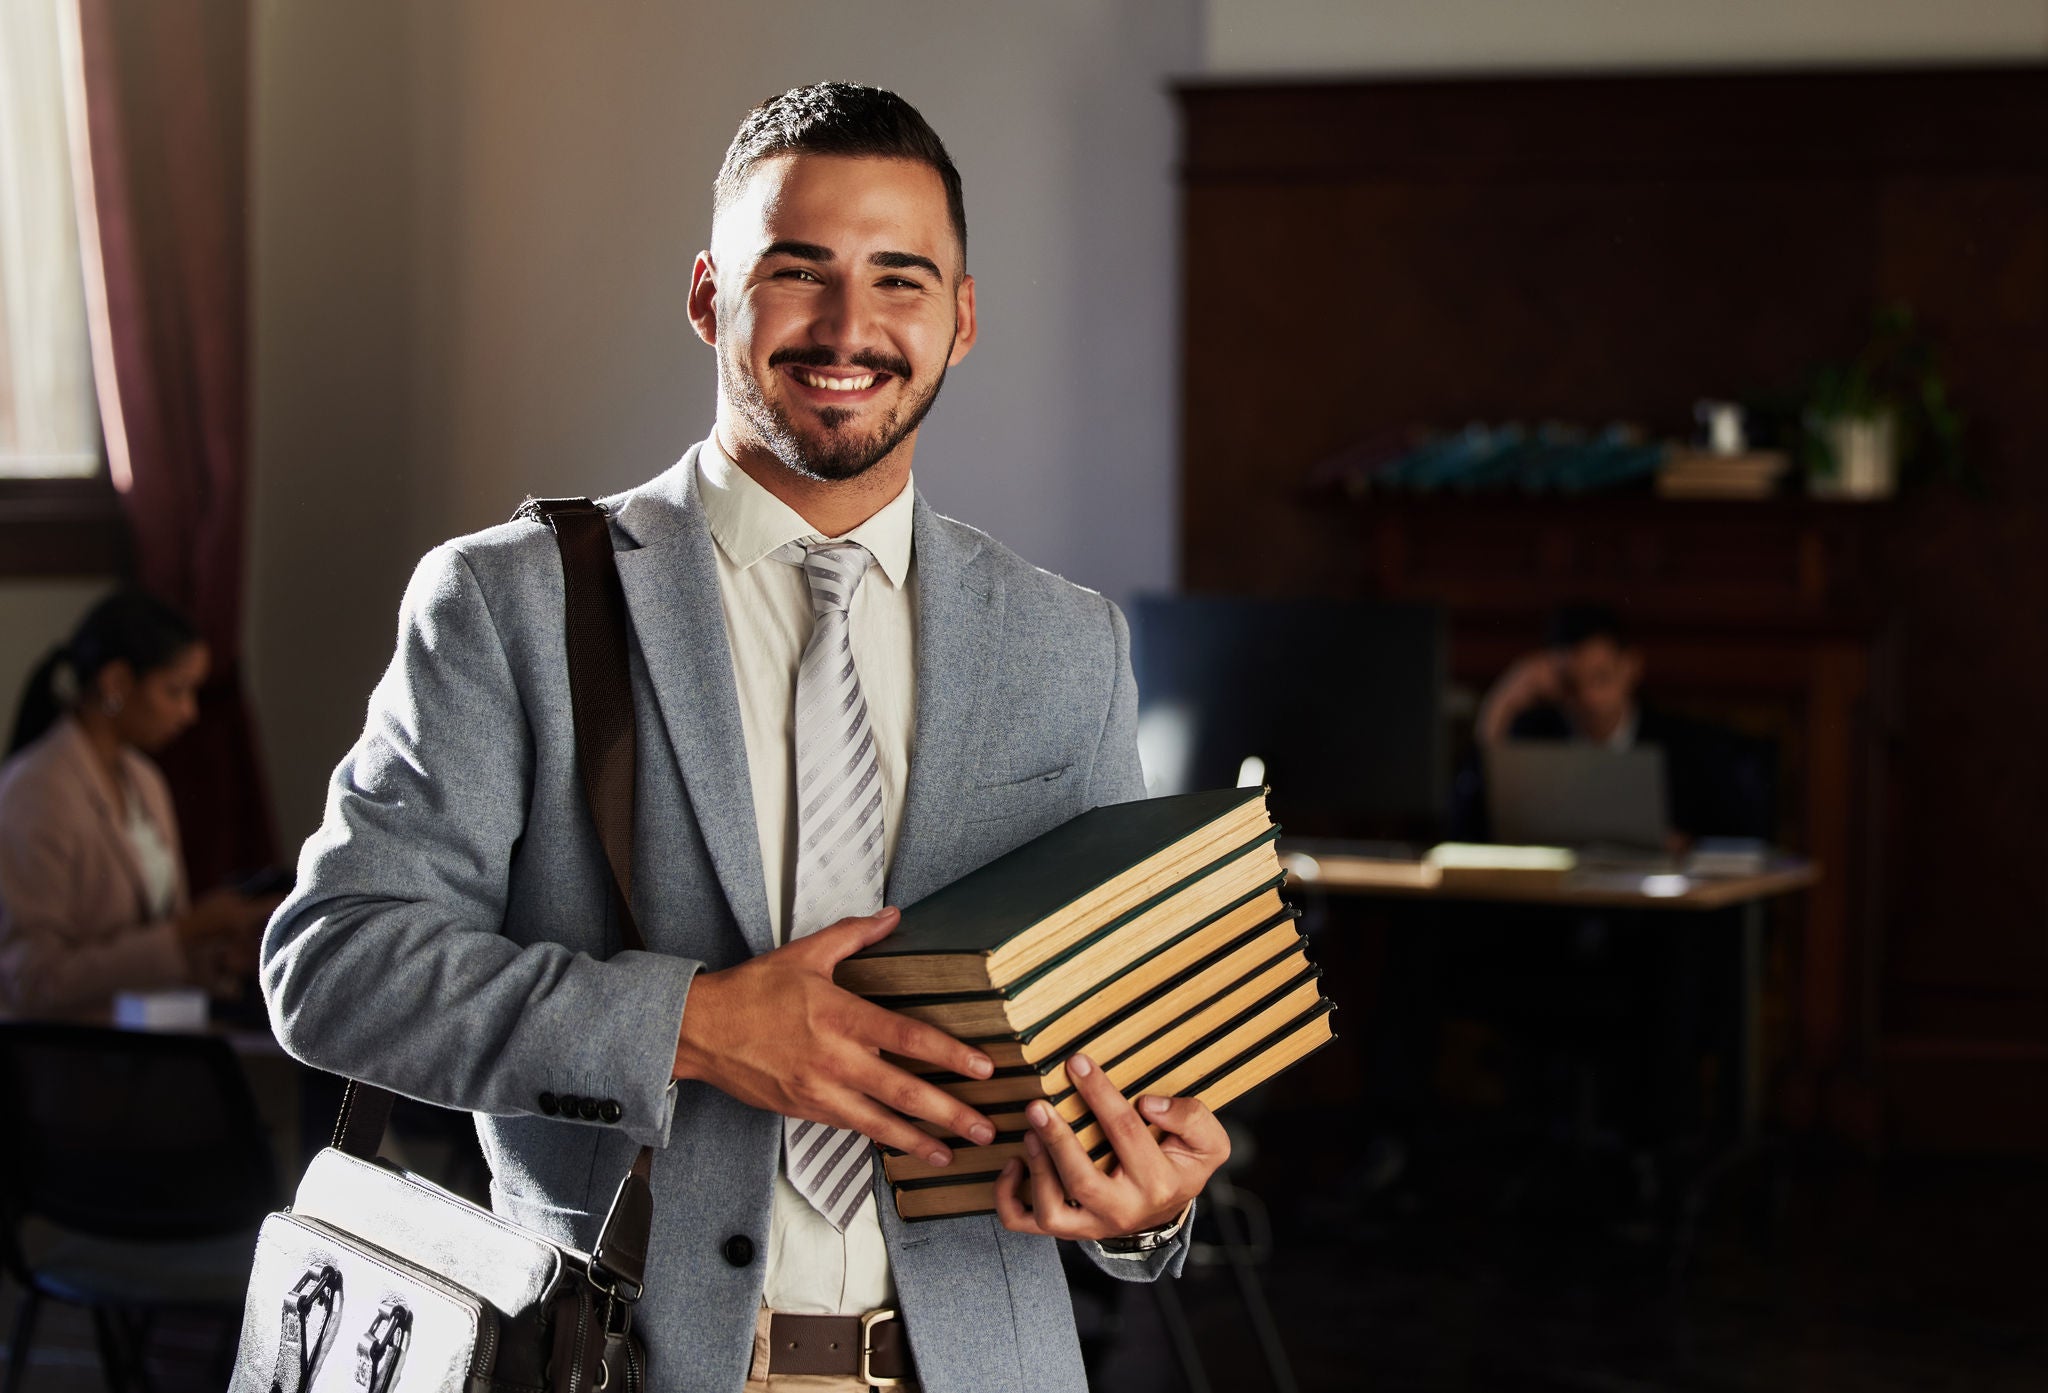 Lawyer holding books smiling